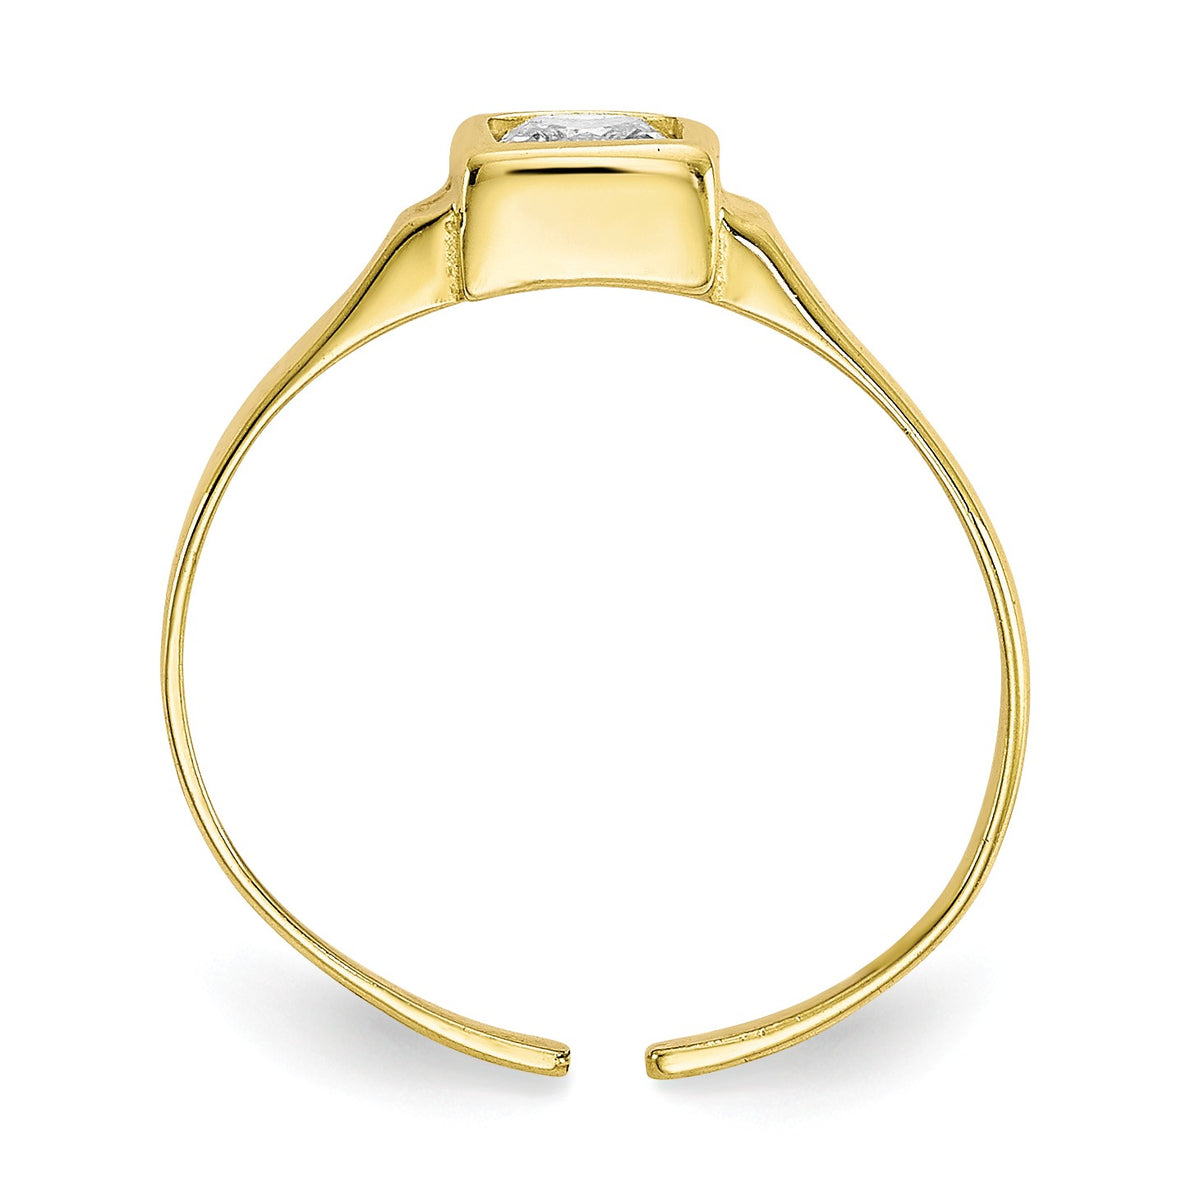 Alternate view of the Square Cubic Zirconia Solitaire Toe Ring in 10 Karat Yellow Gold by The Black Bow Jewelry Co.